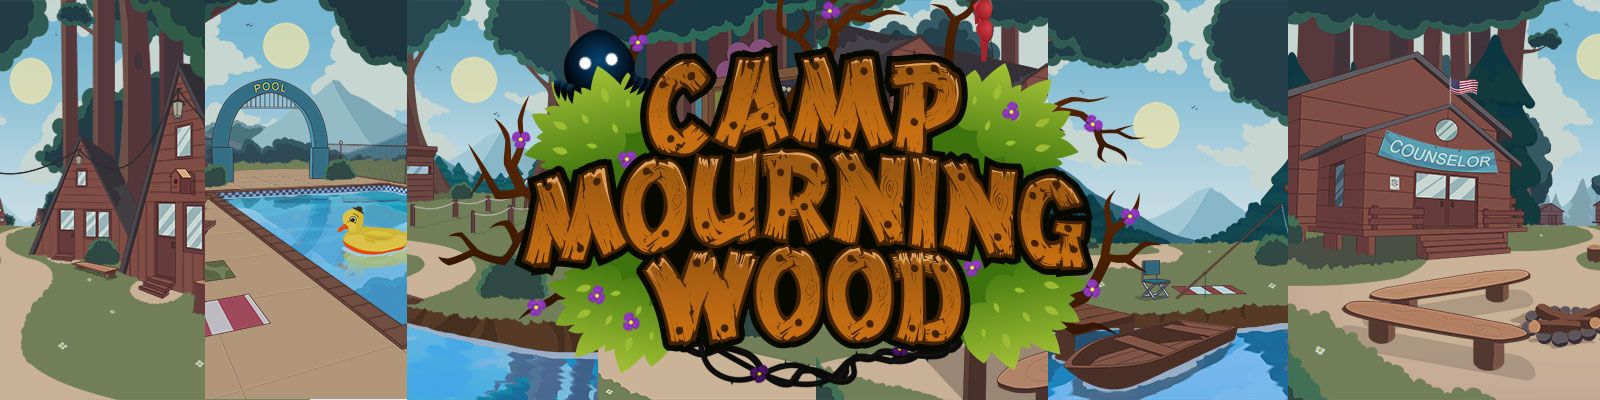 Camp Mourning Wood Apk Android Adult Game Download (11)